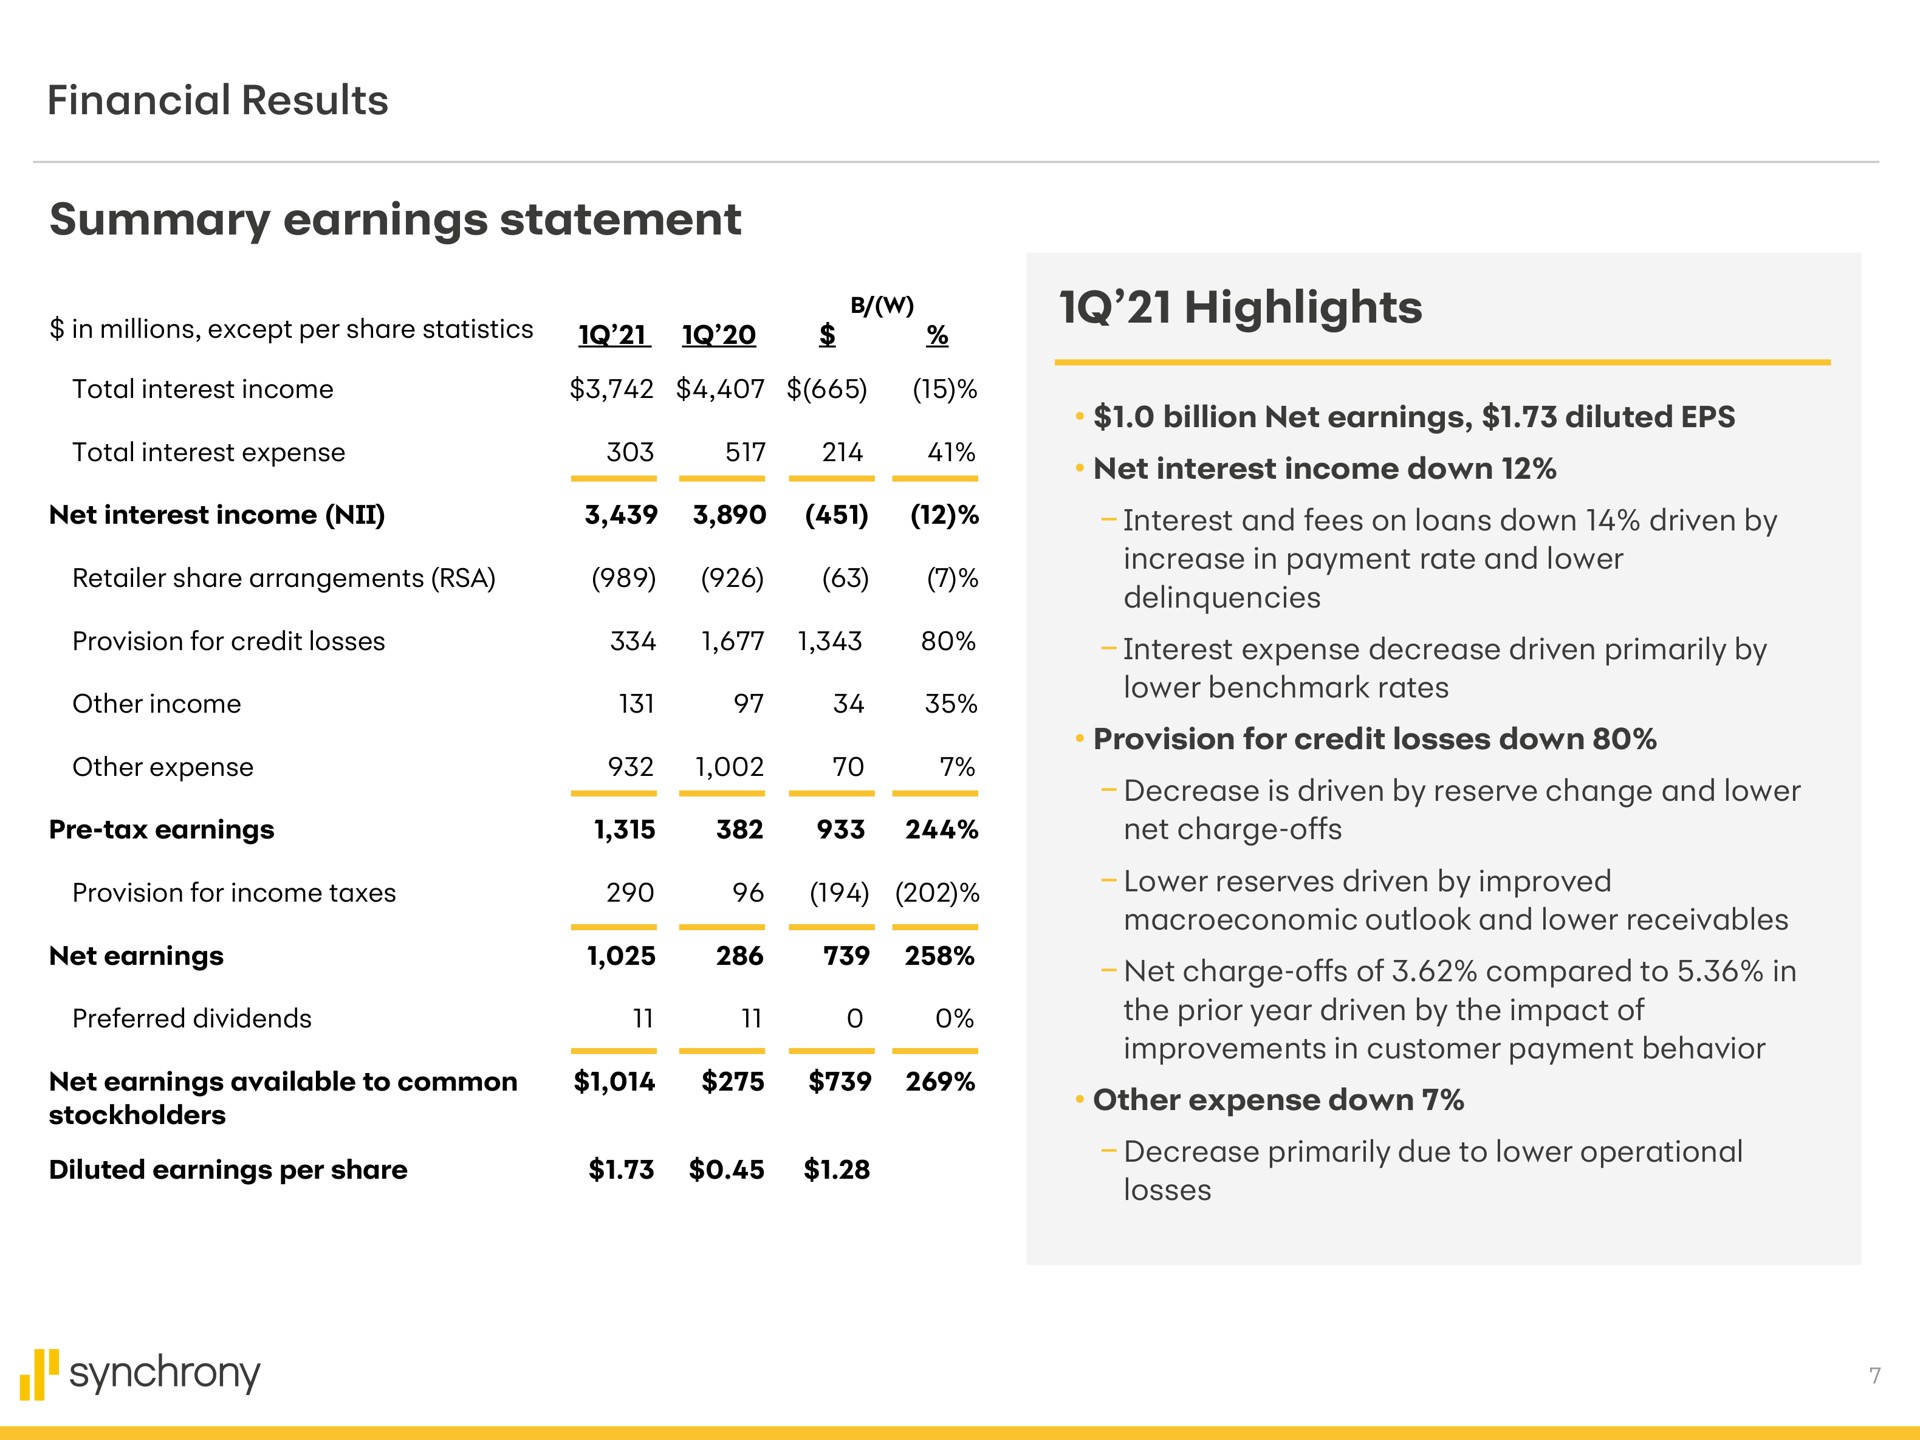 financial results summary earnings statement highlights net interest income i i interest and fees on loans down driven by other income i synchrony | Synchrony Financial